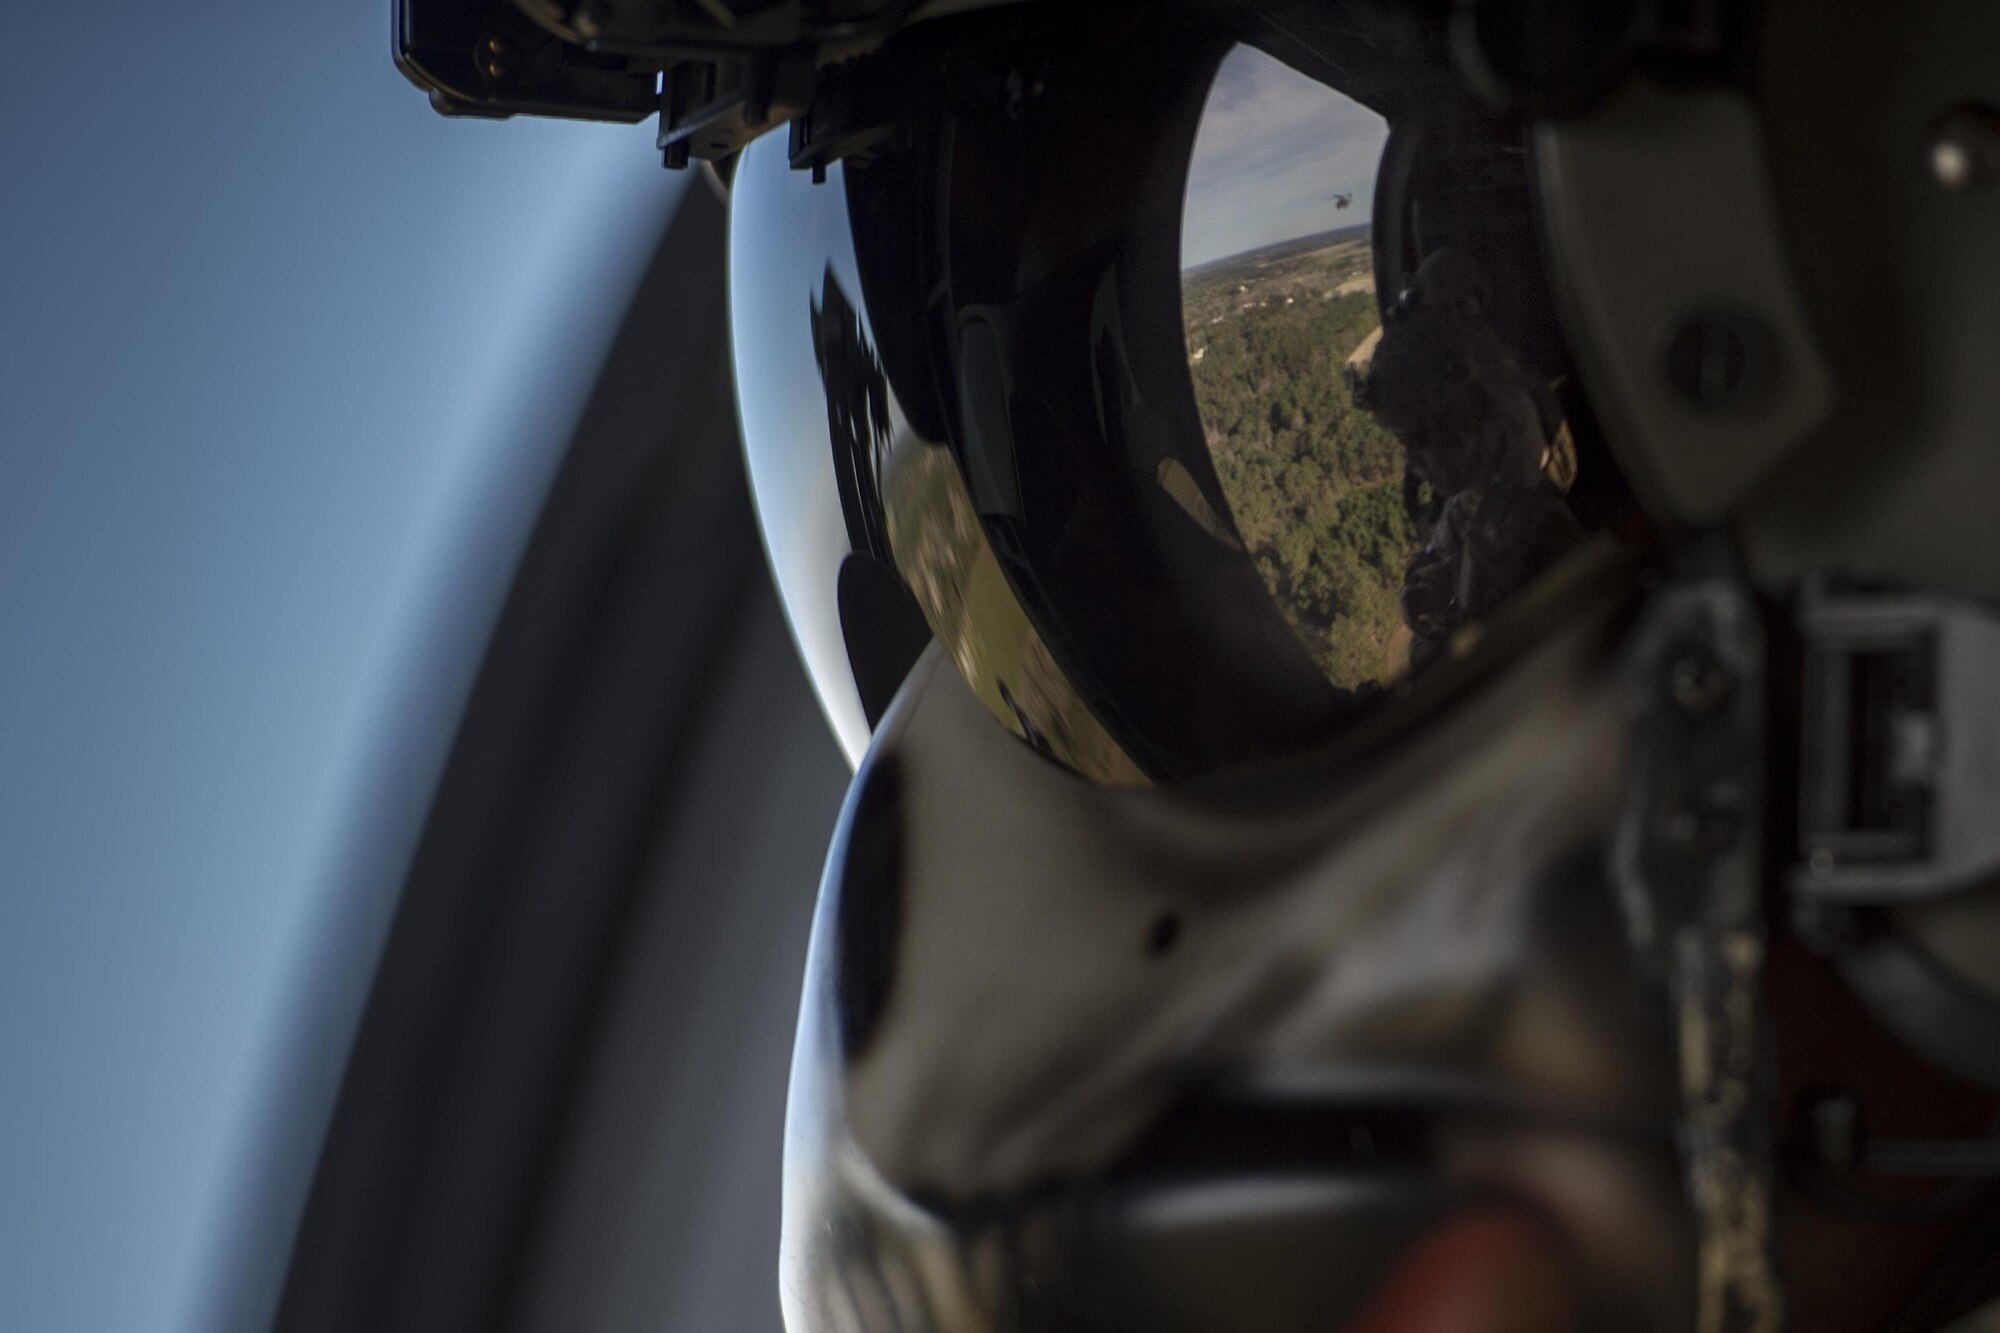 Staff Sgt. David Stringer, 41st Rescue Squadron special missions aviator, watches out of an HH-60G Pave Hawk during a combat search and rescue demonstration as one part of the 75th Anniversary Flying Tiger Reunion, March 10, 2017, at Moody Air Force Base, Ga. In 1941, President Roosevelt signed an executive order forming the American Volunteer Group. The AVG was organized into the 1st, 2nd, and 3rd Pursuit Squadrons and later disbanded and replaced by the 23d Fighter Group in 1942. Under the command of Gen. Claire Chennault, the Flying Tigers comprised of the 74th, 75th, and 76th Pursuit Squadrons defended China against the Japanese. Throughout World War II, the Flying Tigers achieved combat success and flew the US-made Curtiss P-40 Warhawks painted with the shark-mouth design. (U.S. Air Force photo by Tech. Sgt. Zachary Wolf)